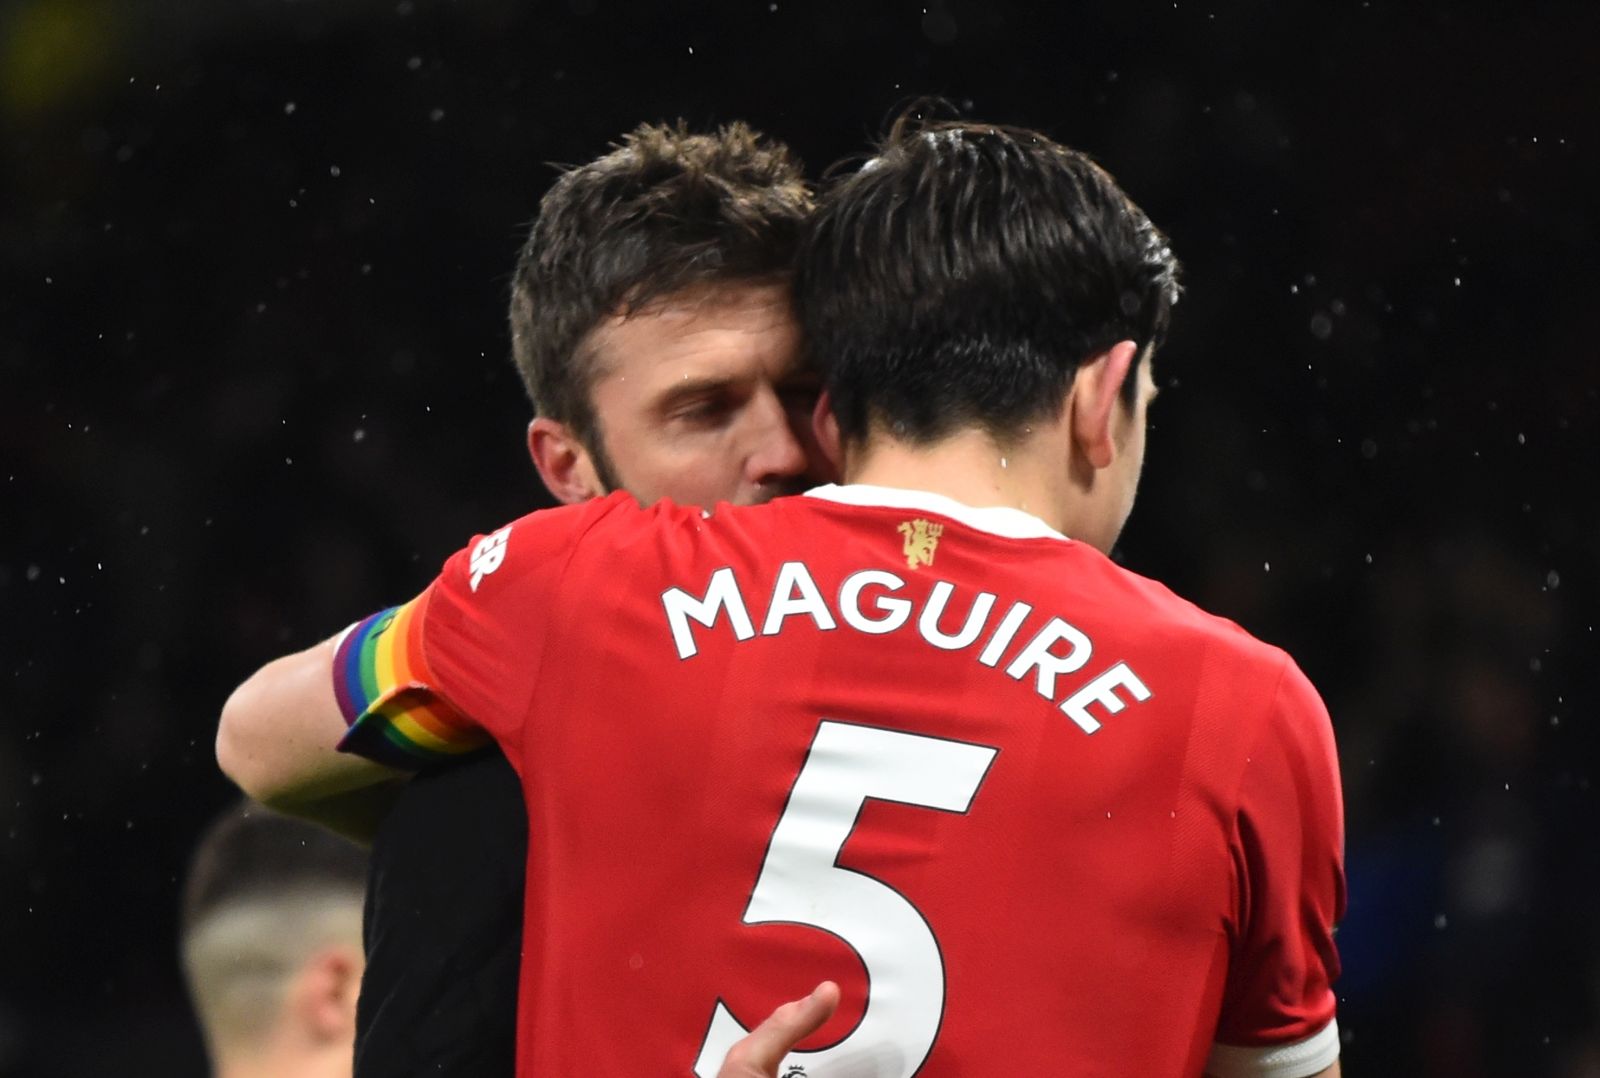 epa09617736 Manchester United's Harry Maguire (R) celebrates with manager Michael Carrick (L) after the English Premier League soccer match between Manchester United and Arsenal FC in Manchester, Britain, 02 December 2021.  EPA/PETER POWELL EDITORIAL USE ONLY. No use with unauthorized audio, video, data, fixture lists, club/league logos or 'live' services. Online in-match use limited to 120 images, no video emulation. No use in betting, games or single club/league/player publications